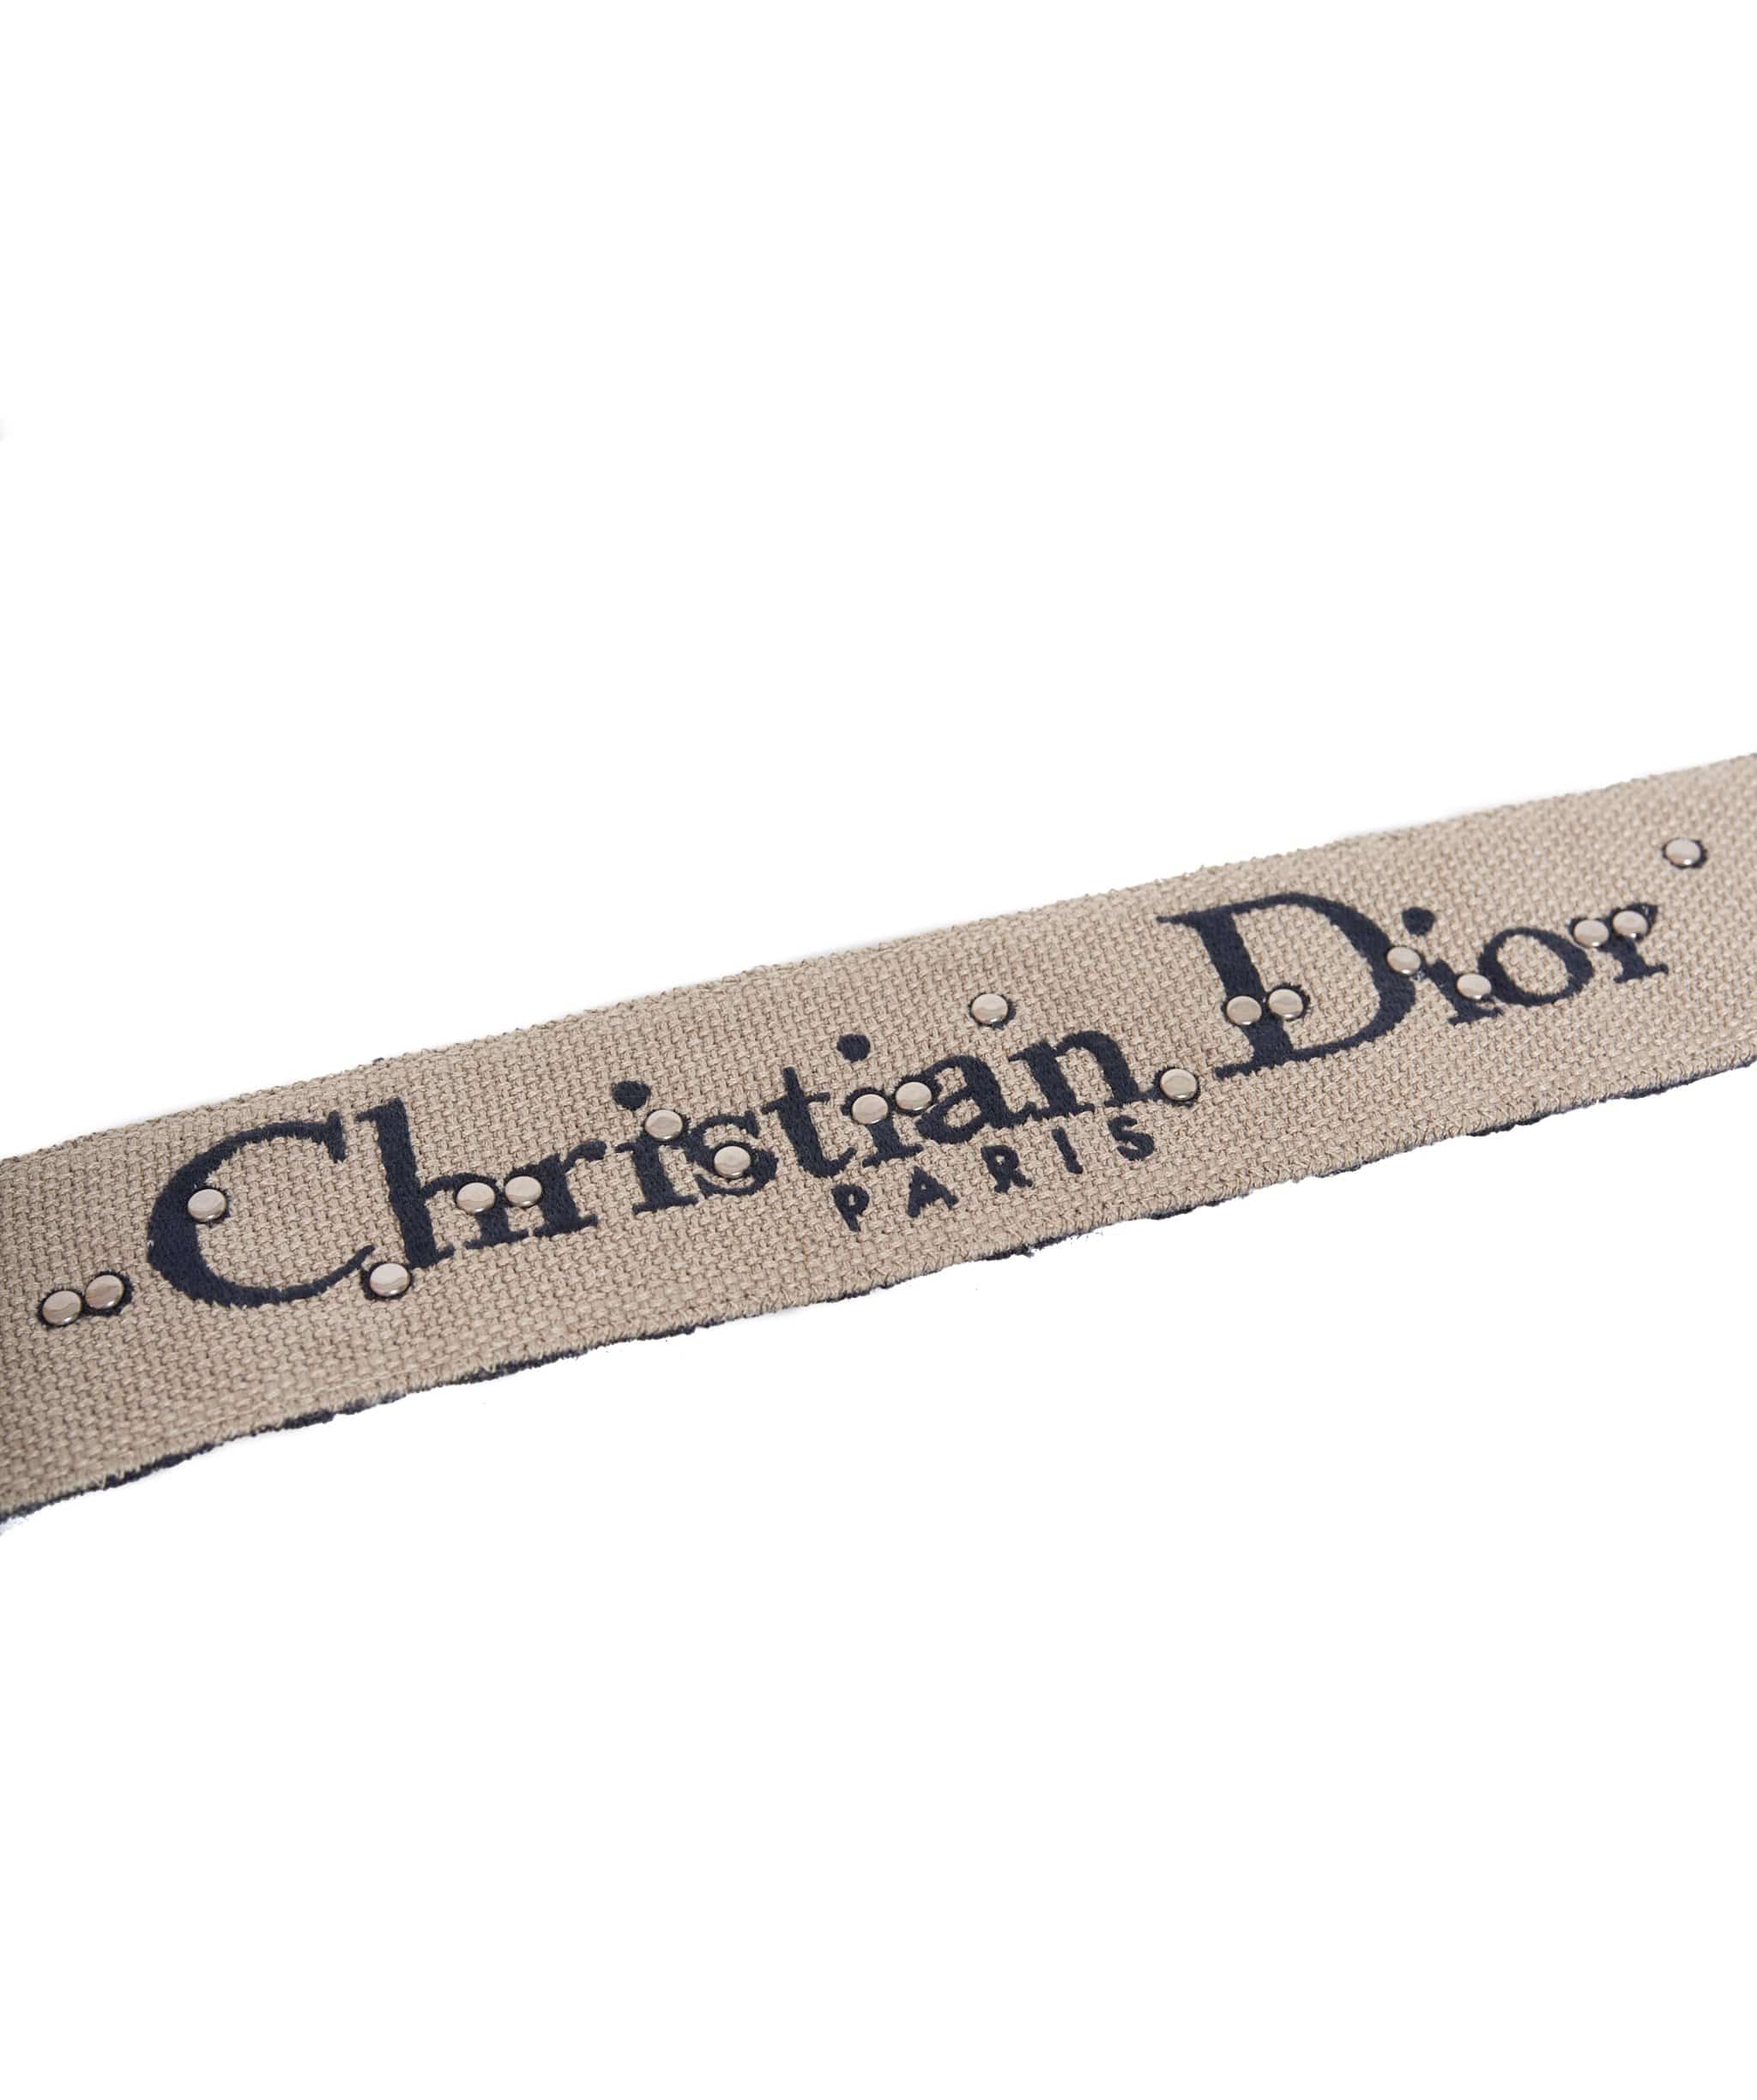 Christian Dior Chtisitian Dior strap - ADL1057